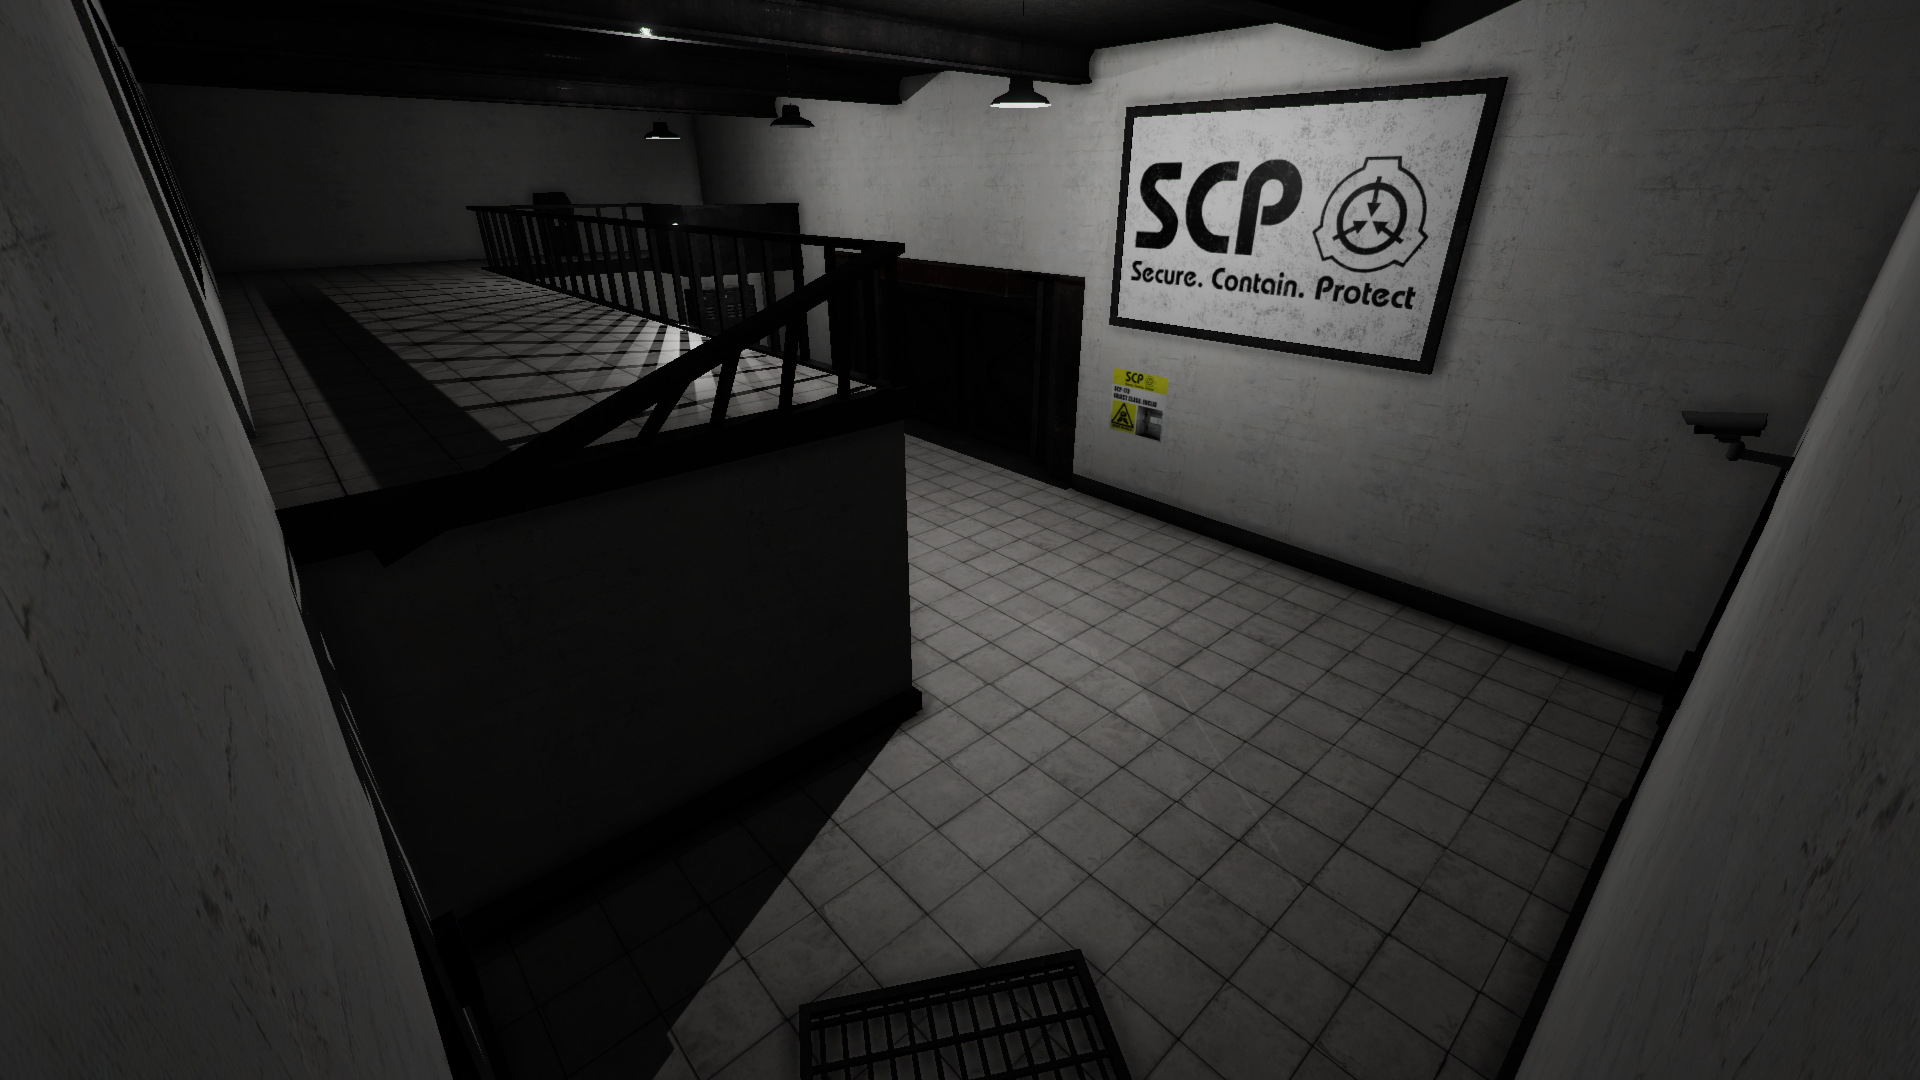 Scp event classified. Камера 173 содержания SCP камера.